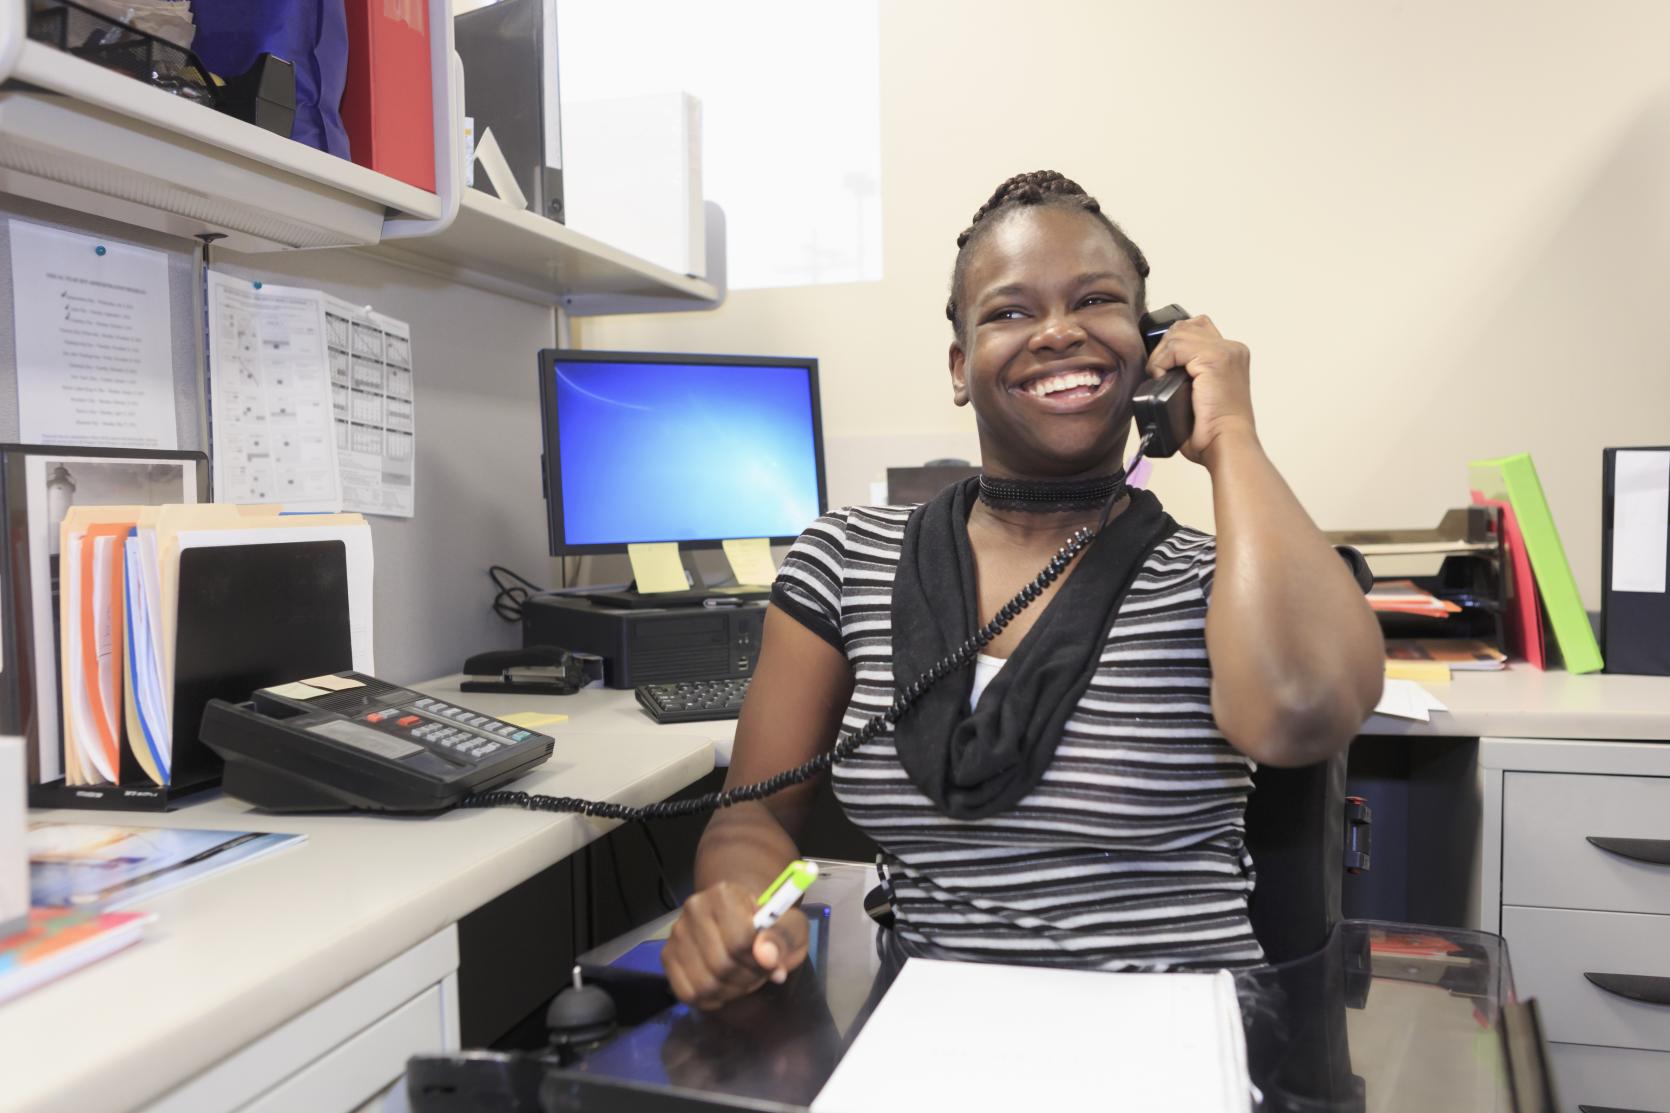 A Black woman using a power wheelchair is sitting at a corner office desk. She is wearing a black and white striped shirt with a black scarf. She is holding a highlighter in her right hand and a desk phone in her right hand, held up to her ear. She has a big smile on her face. The desk is filled with paper files and a desktop computer.